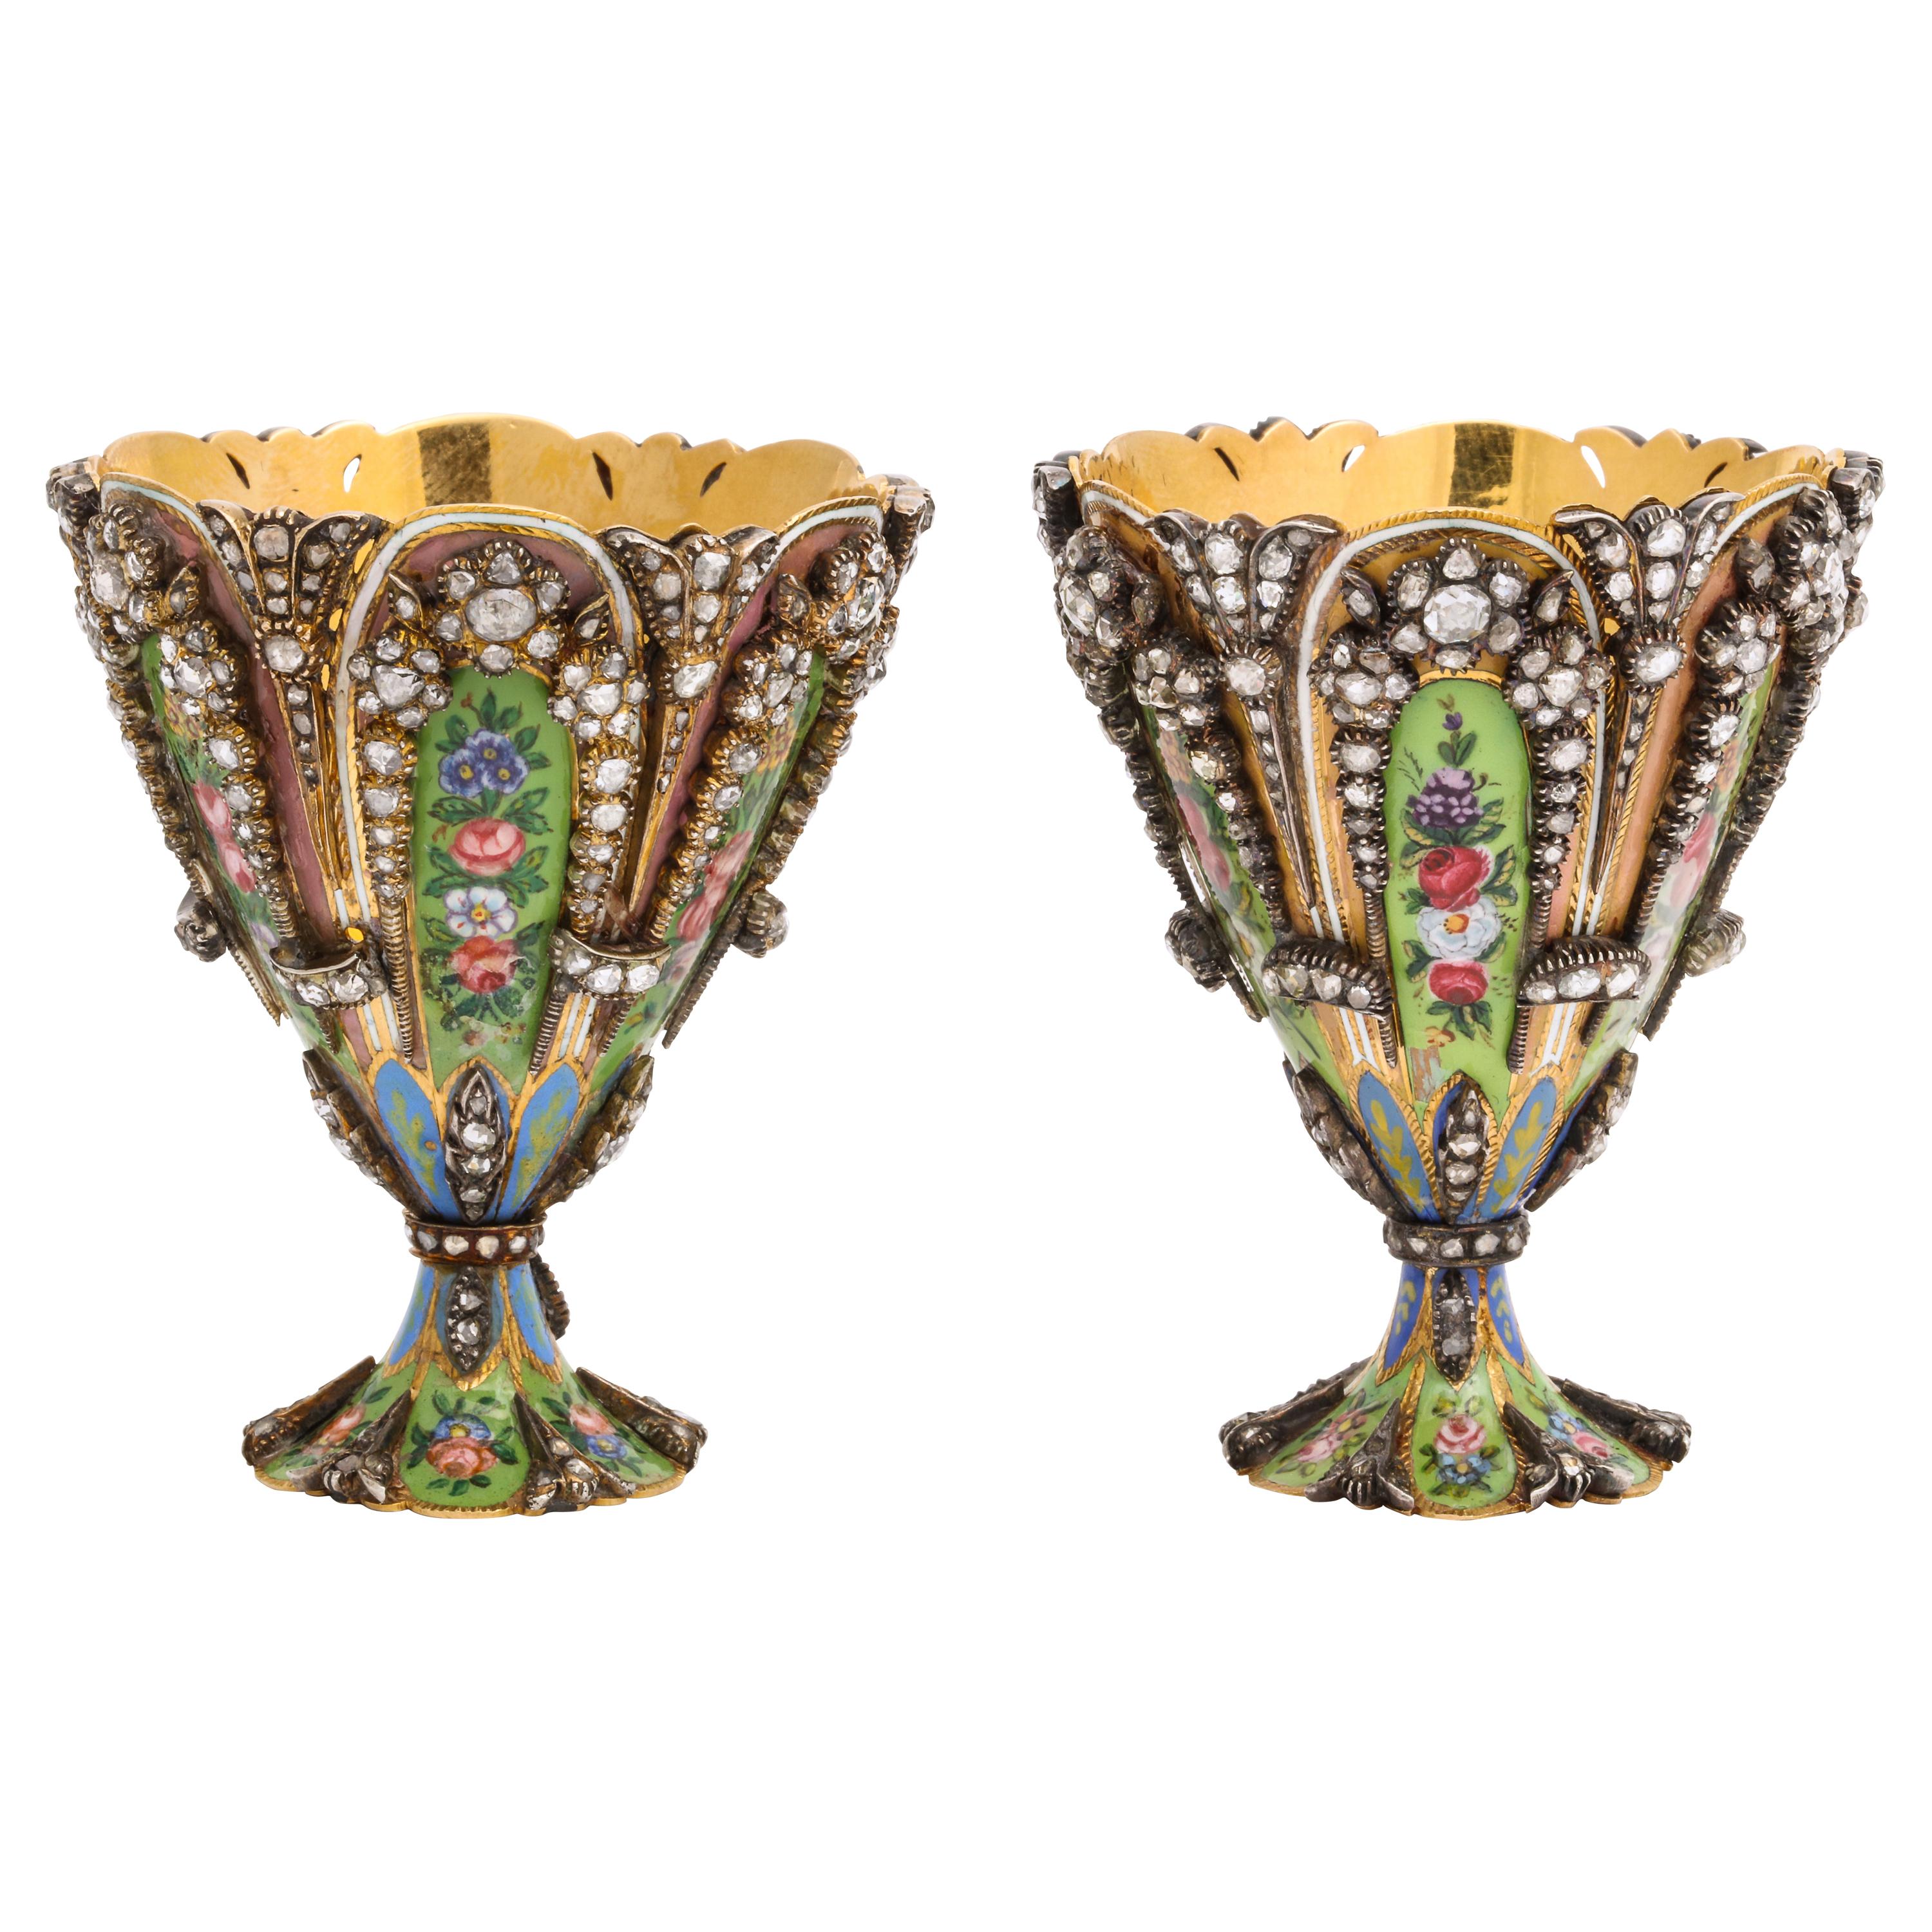 Highly Important Museum Quality Pair of Diamond and Enamel Zarfs For Sale